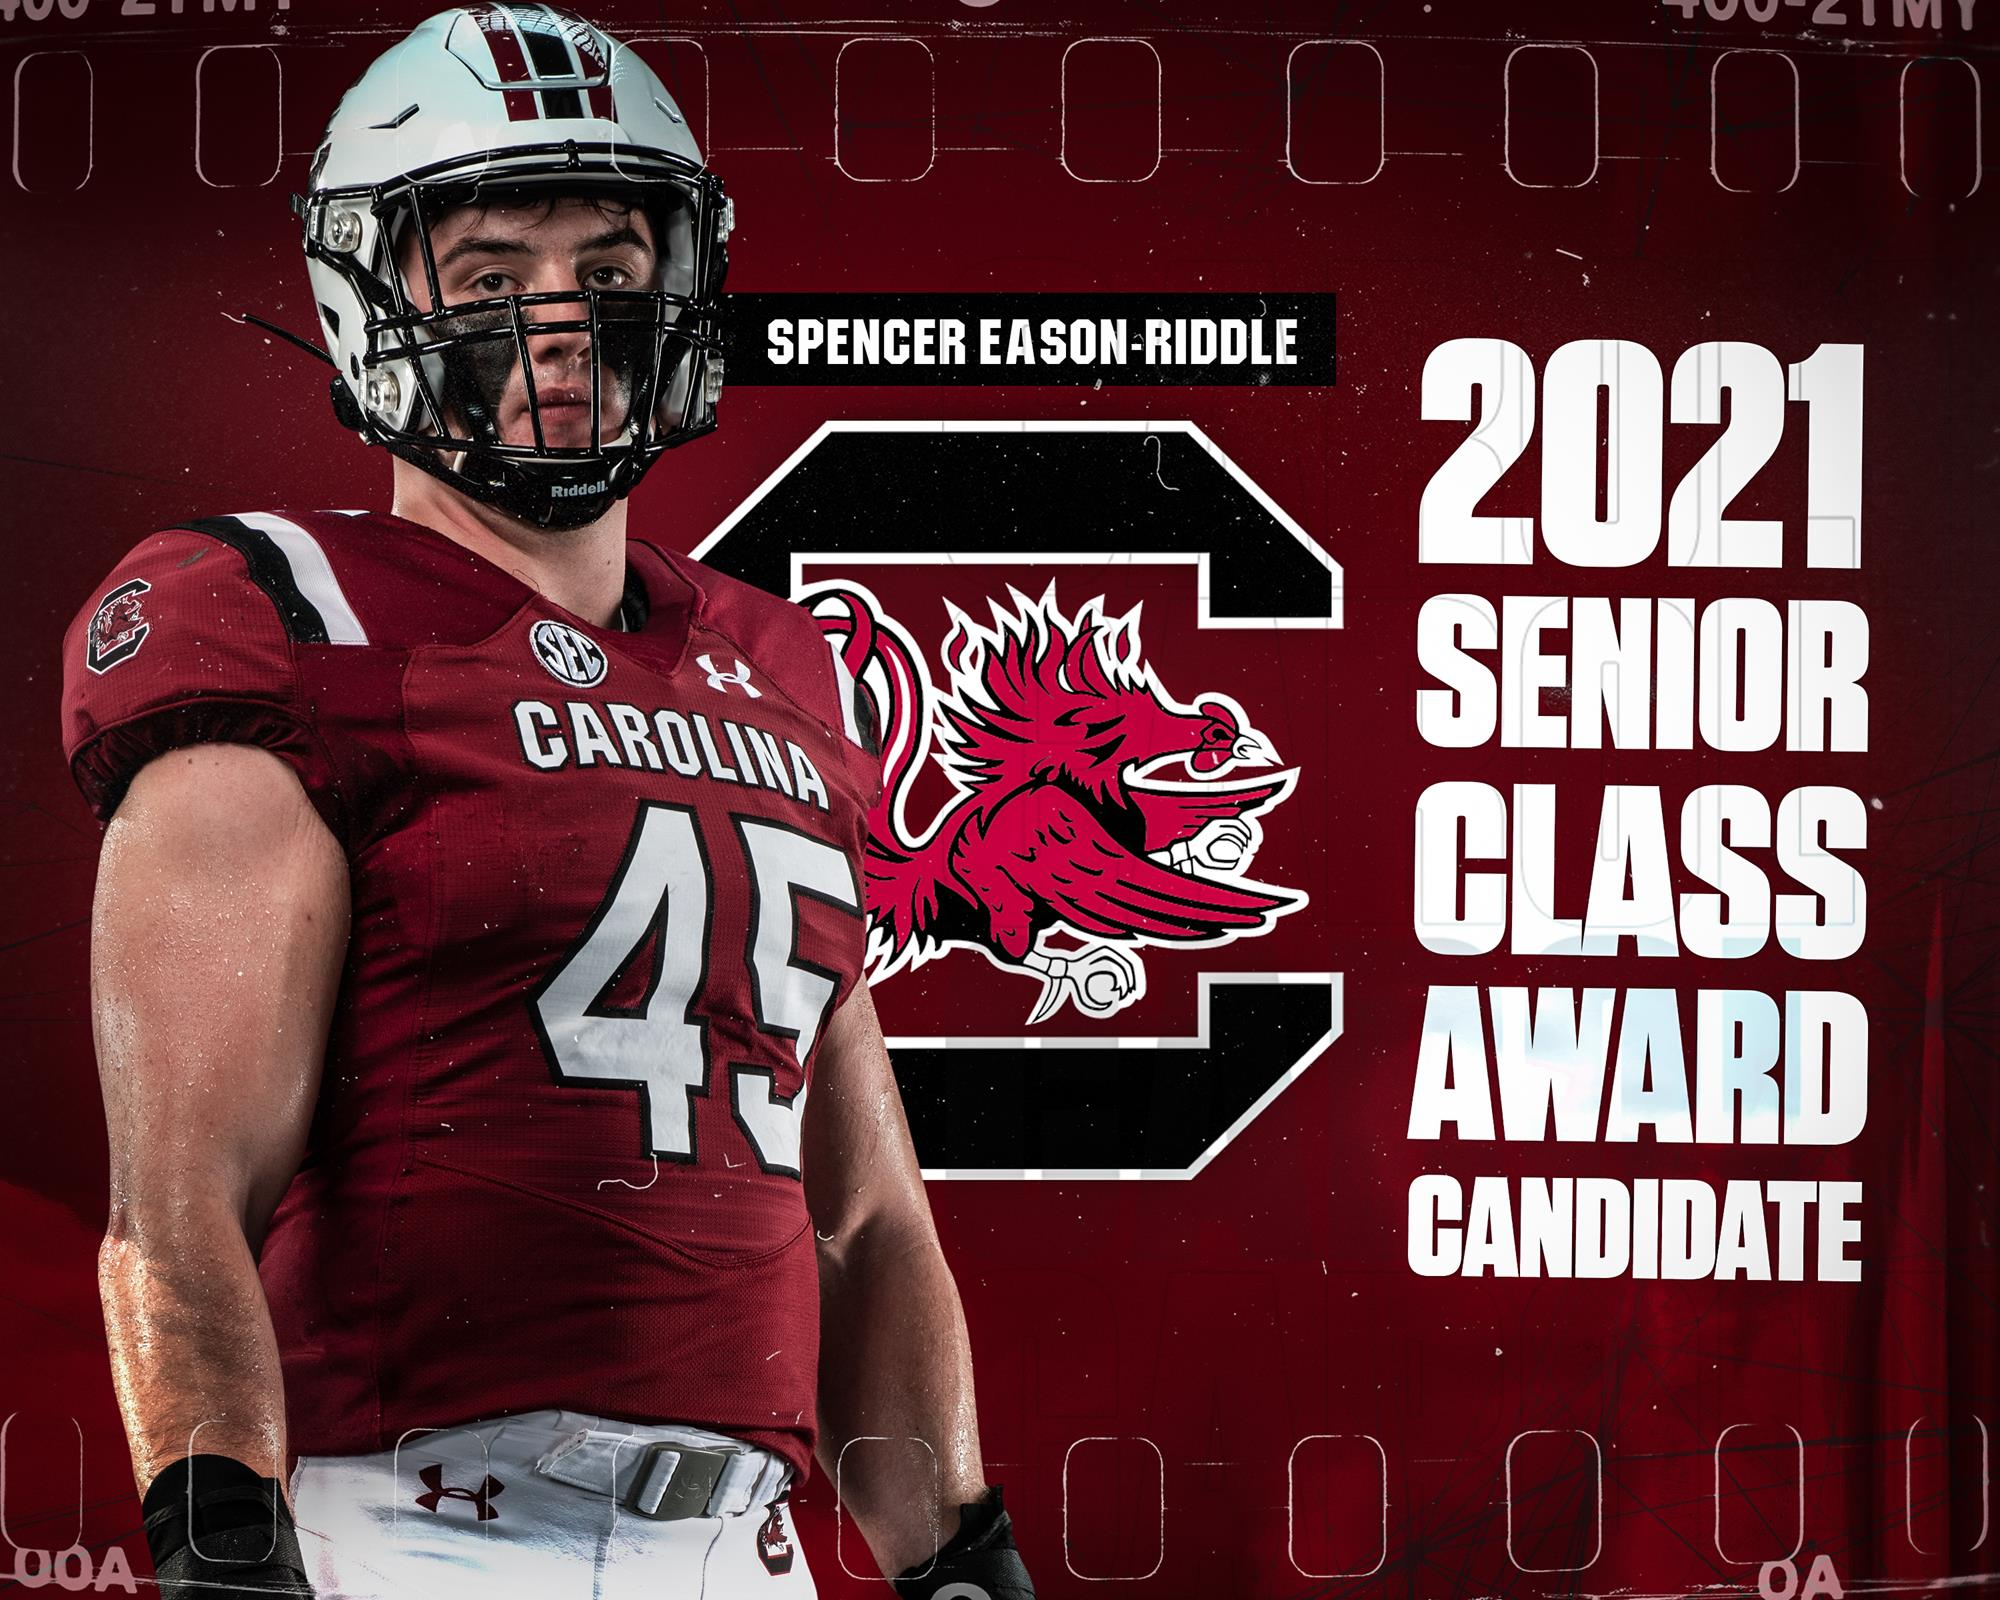 Eason-Riddle Named a Candidate for the Senior Class Award